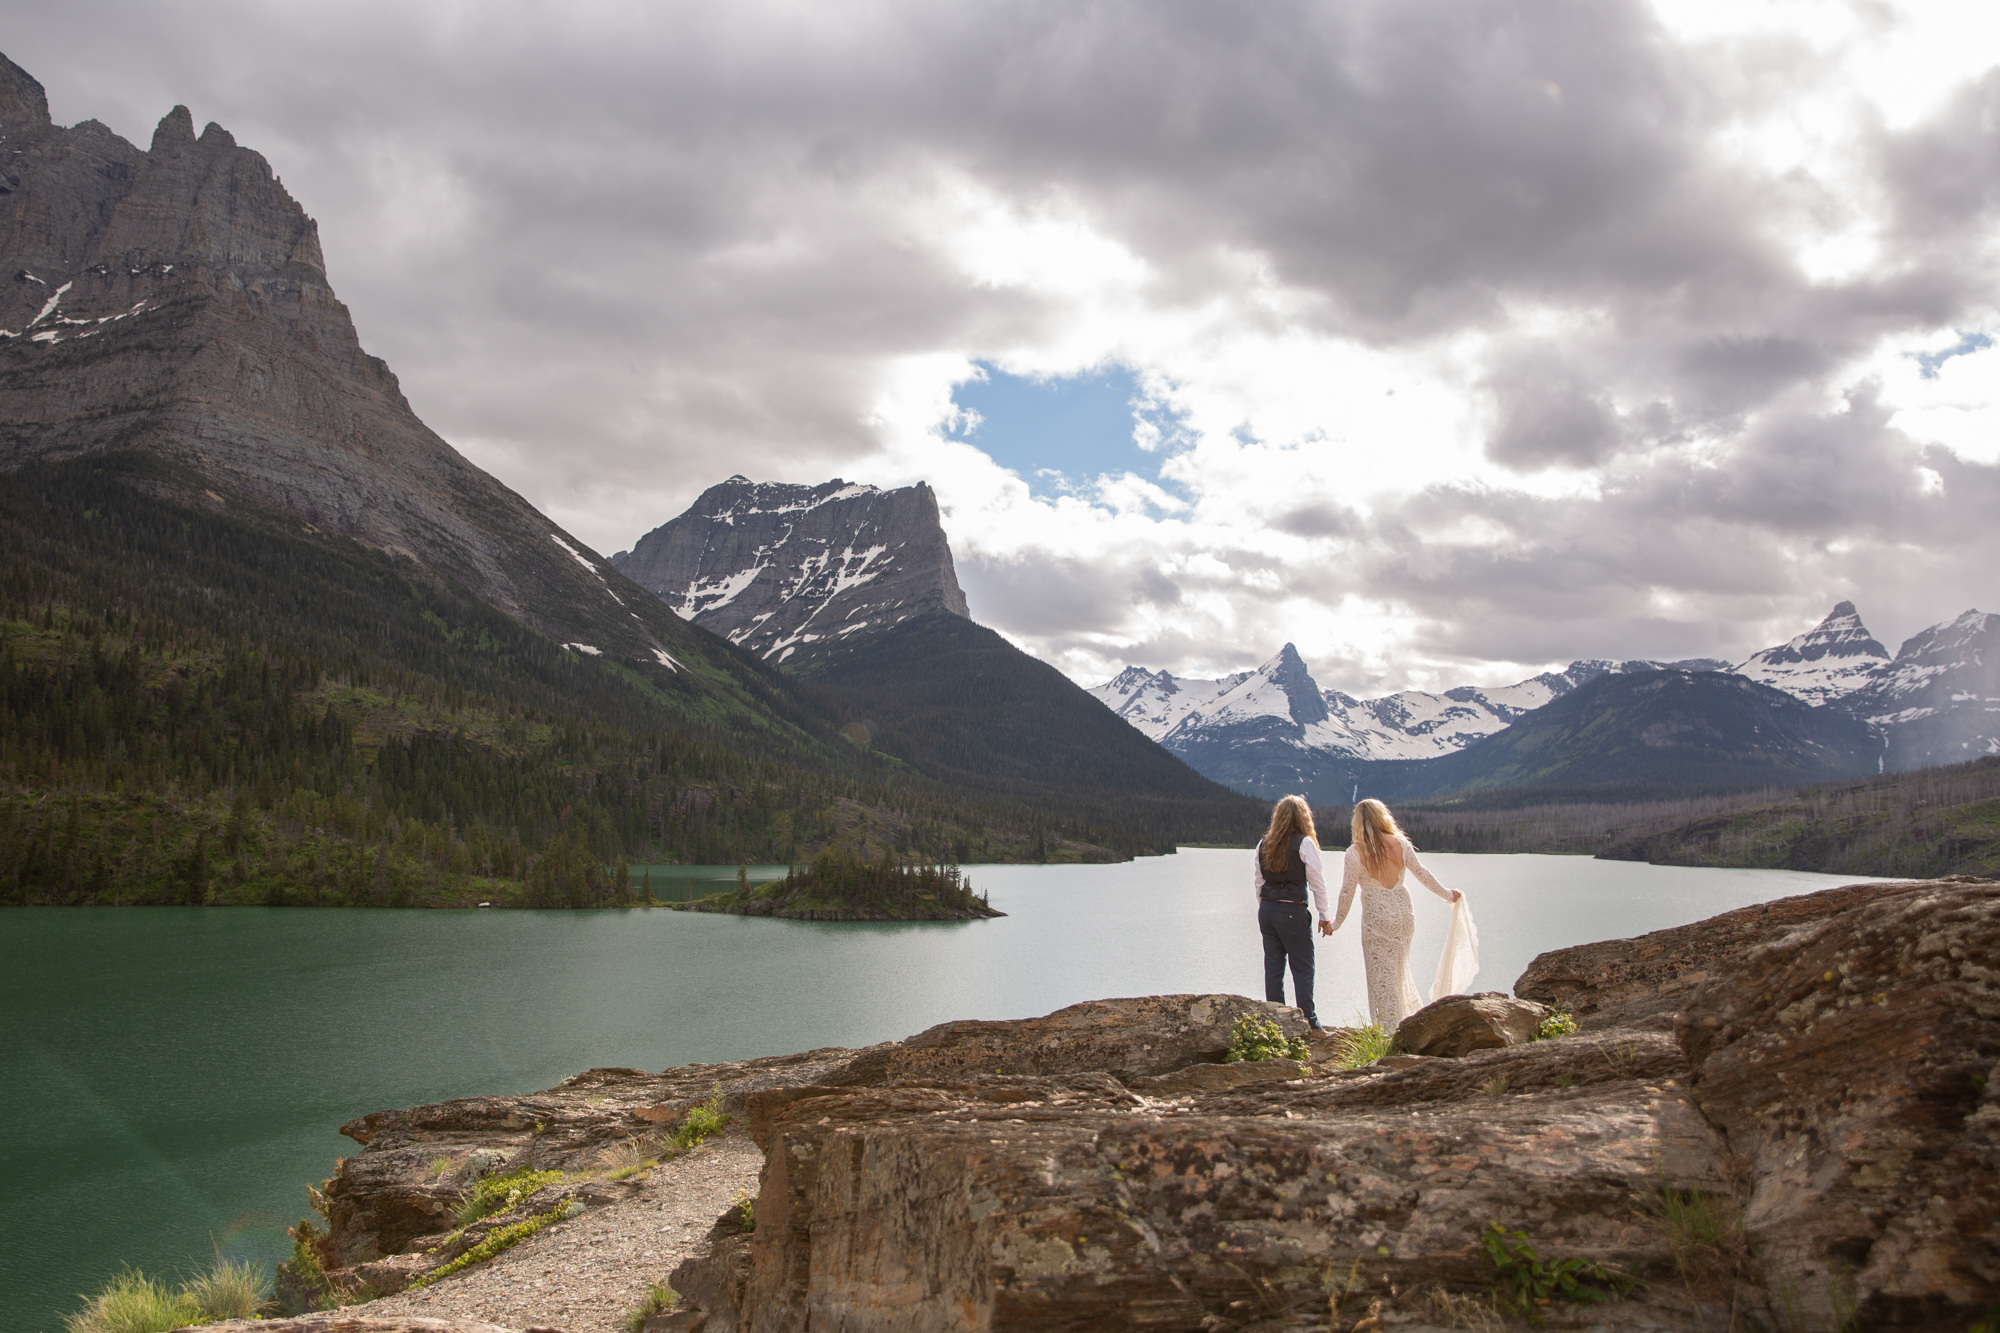 Two brides stand hand in hand on a rocky point overlooking the mountains after eloping in Glacier National Park.